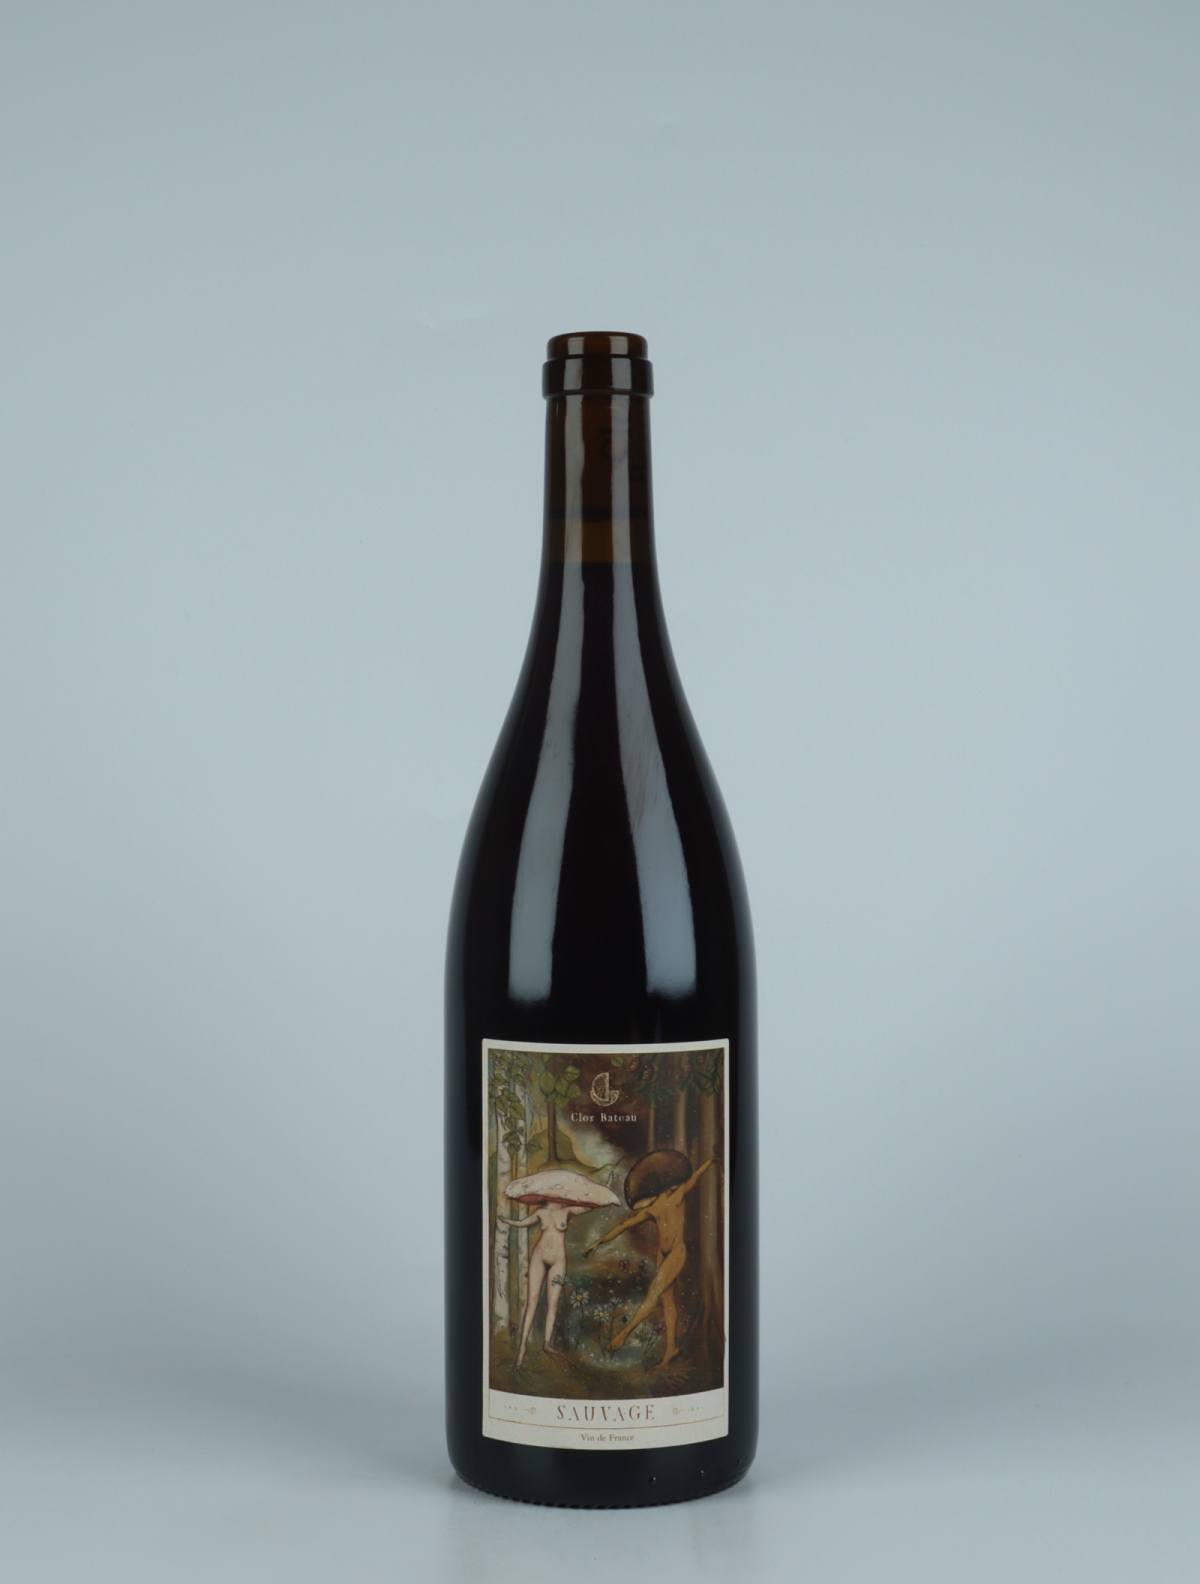 A bottle 2021 Sauvage Red wine from Clos Bateau, Beaujolais in France